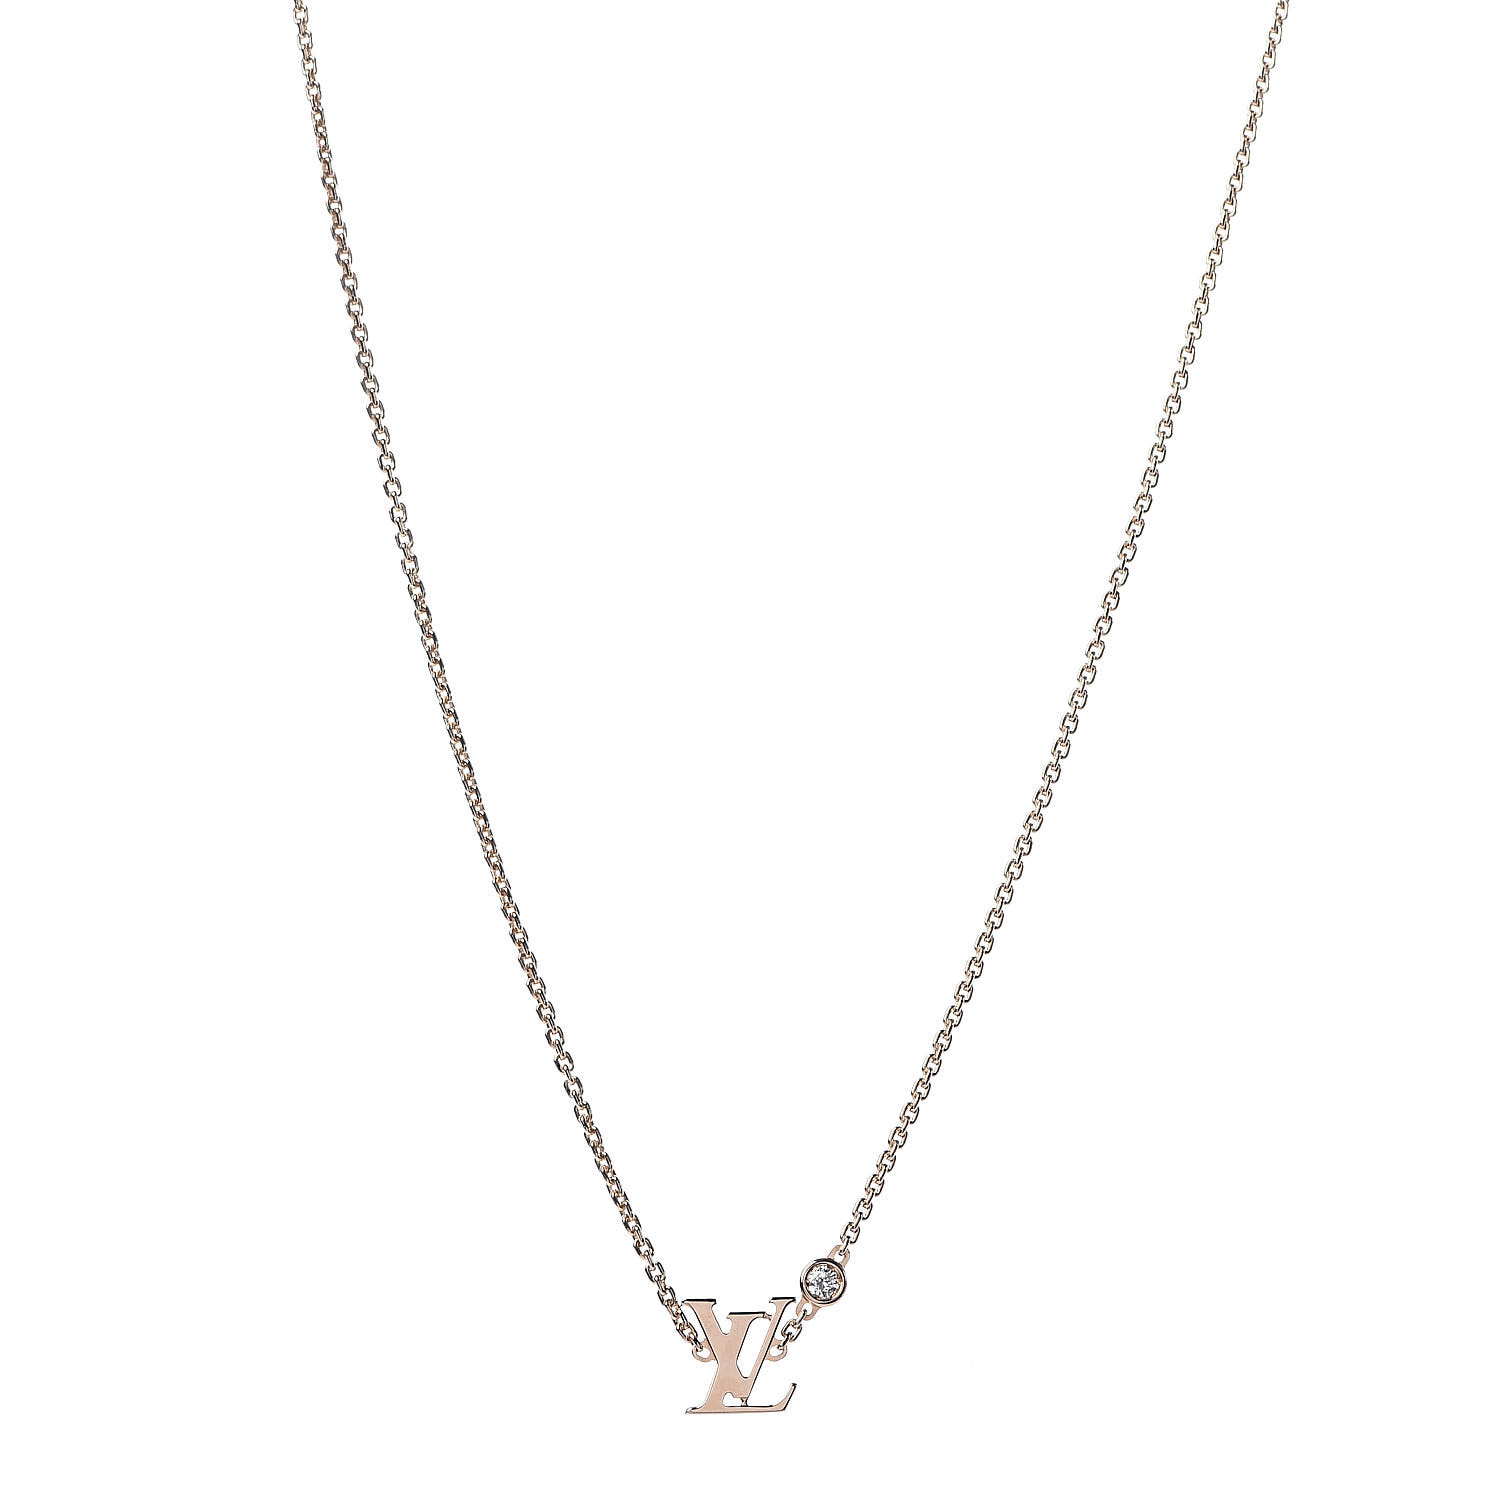 Louis Vuitton Idylle Blossom Stud, Pink Gold and Diamonds - per Unit. Size NSA